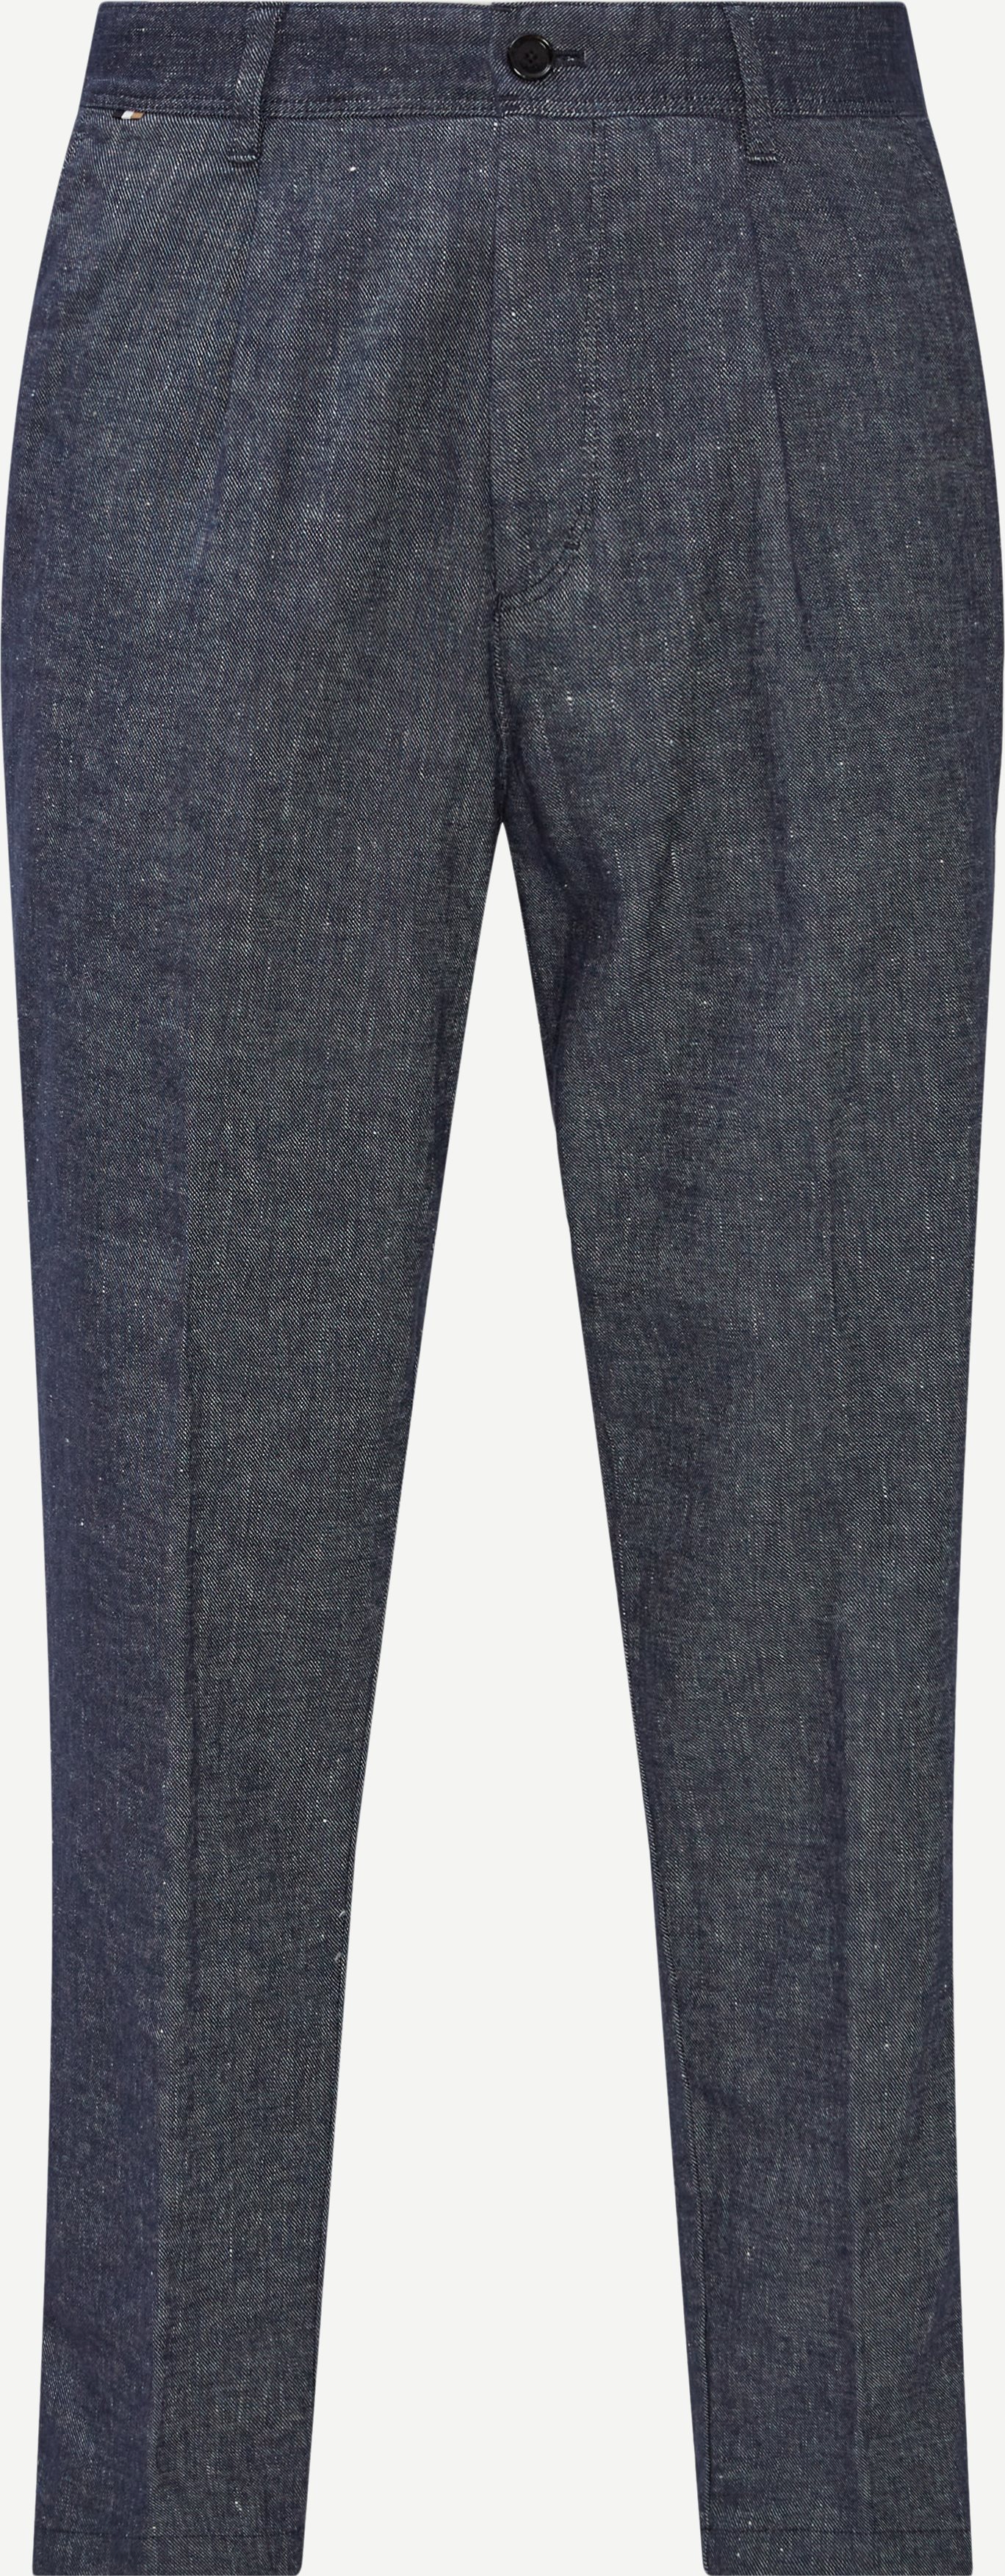 Trousers - Relaxed fit - Blue